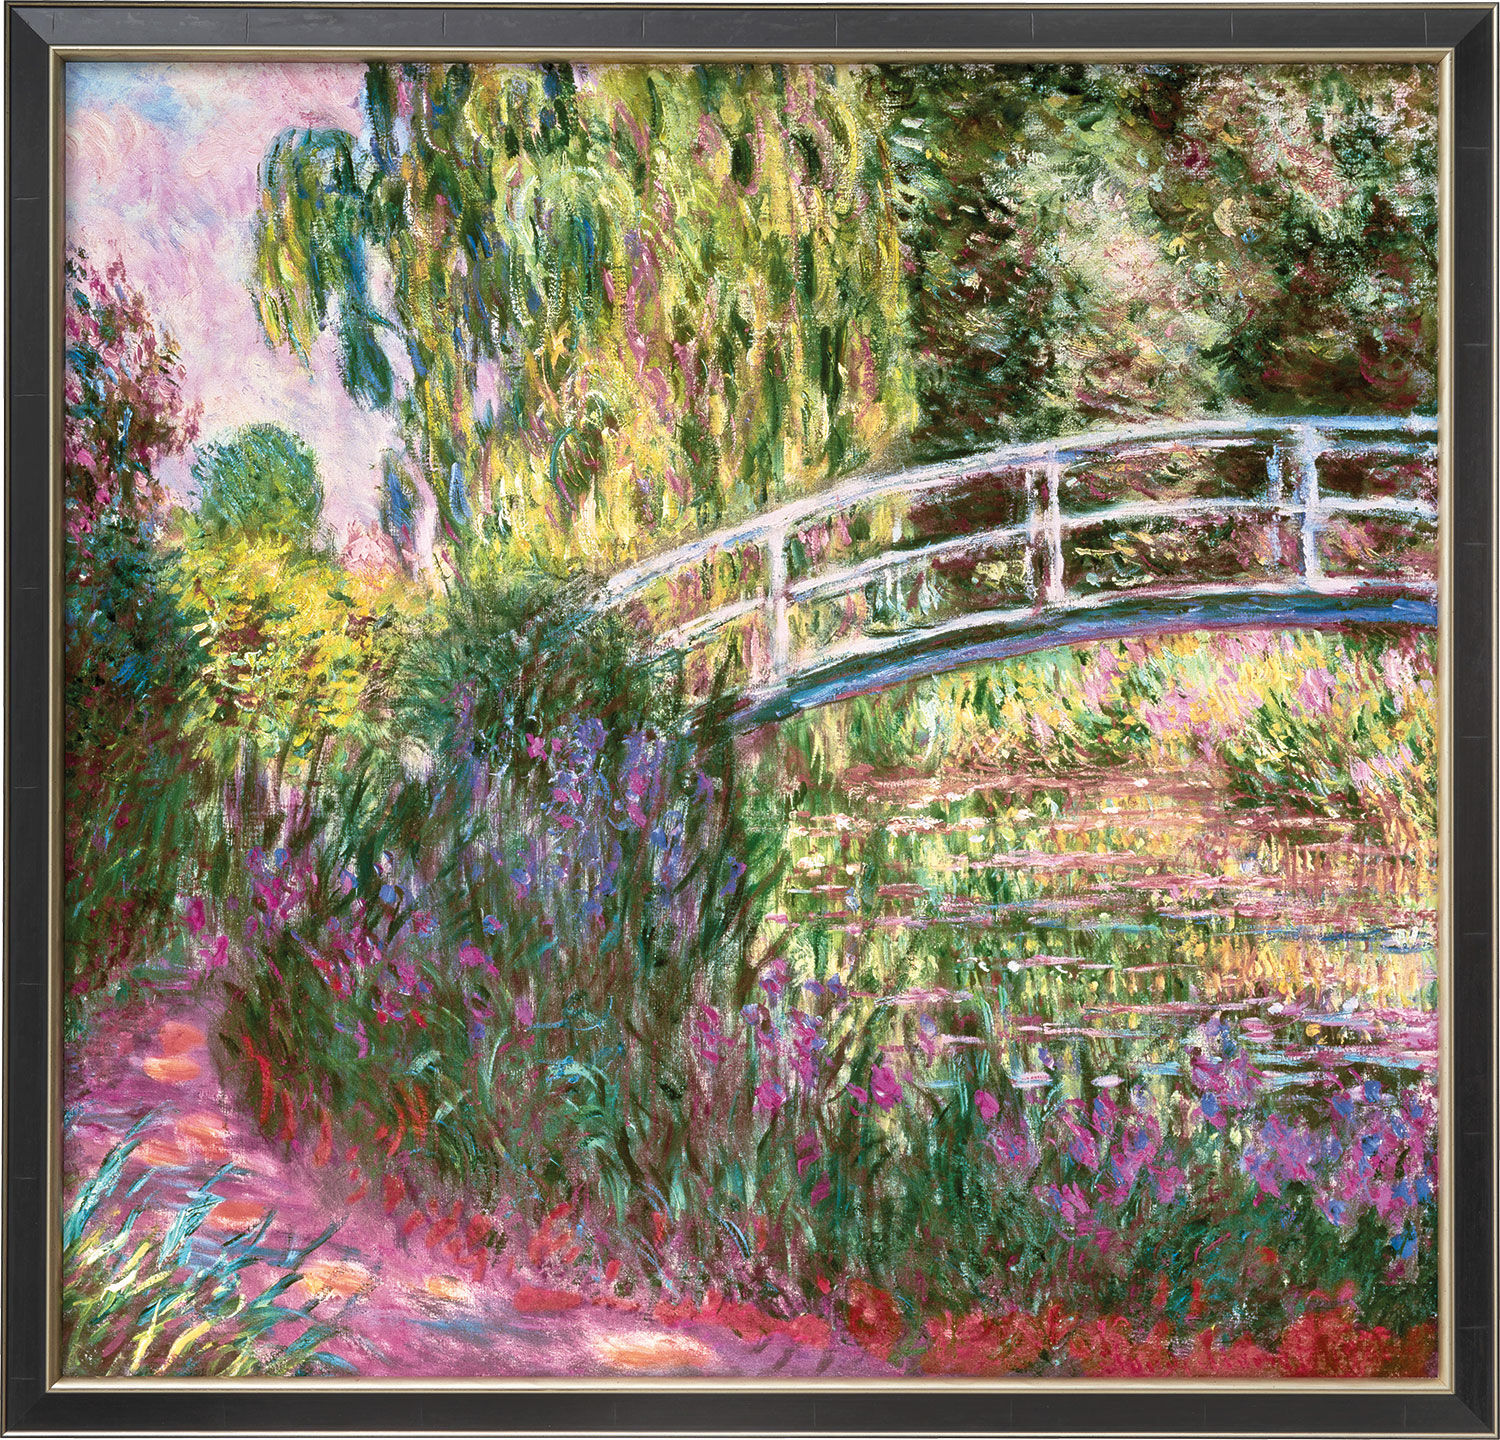 Picture "The Japanese Bridge in the Garden of Giverny" (around 1900), black and silver-coloured framed version by Claude Monet